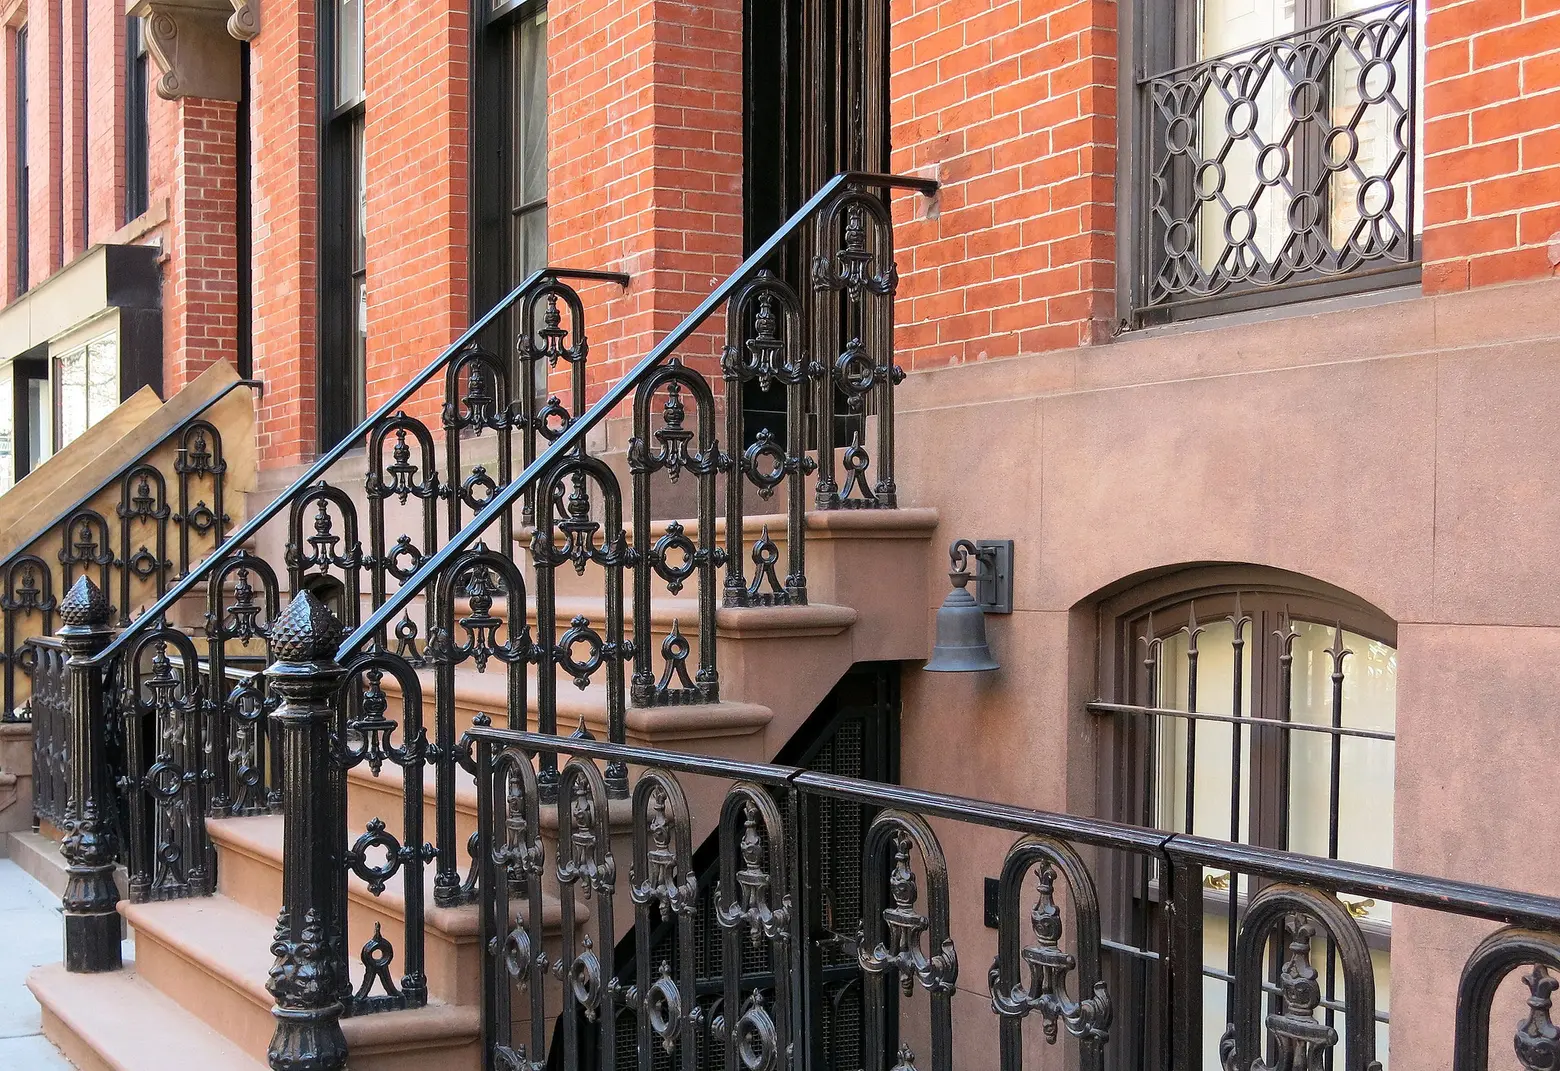 After 20 years, Sarah Jessica Parker sells West Village townhouse for $15M